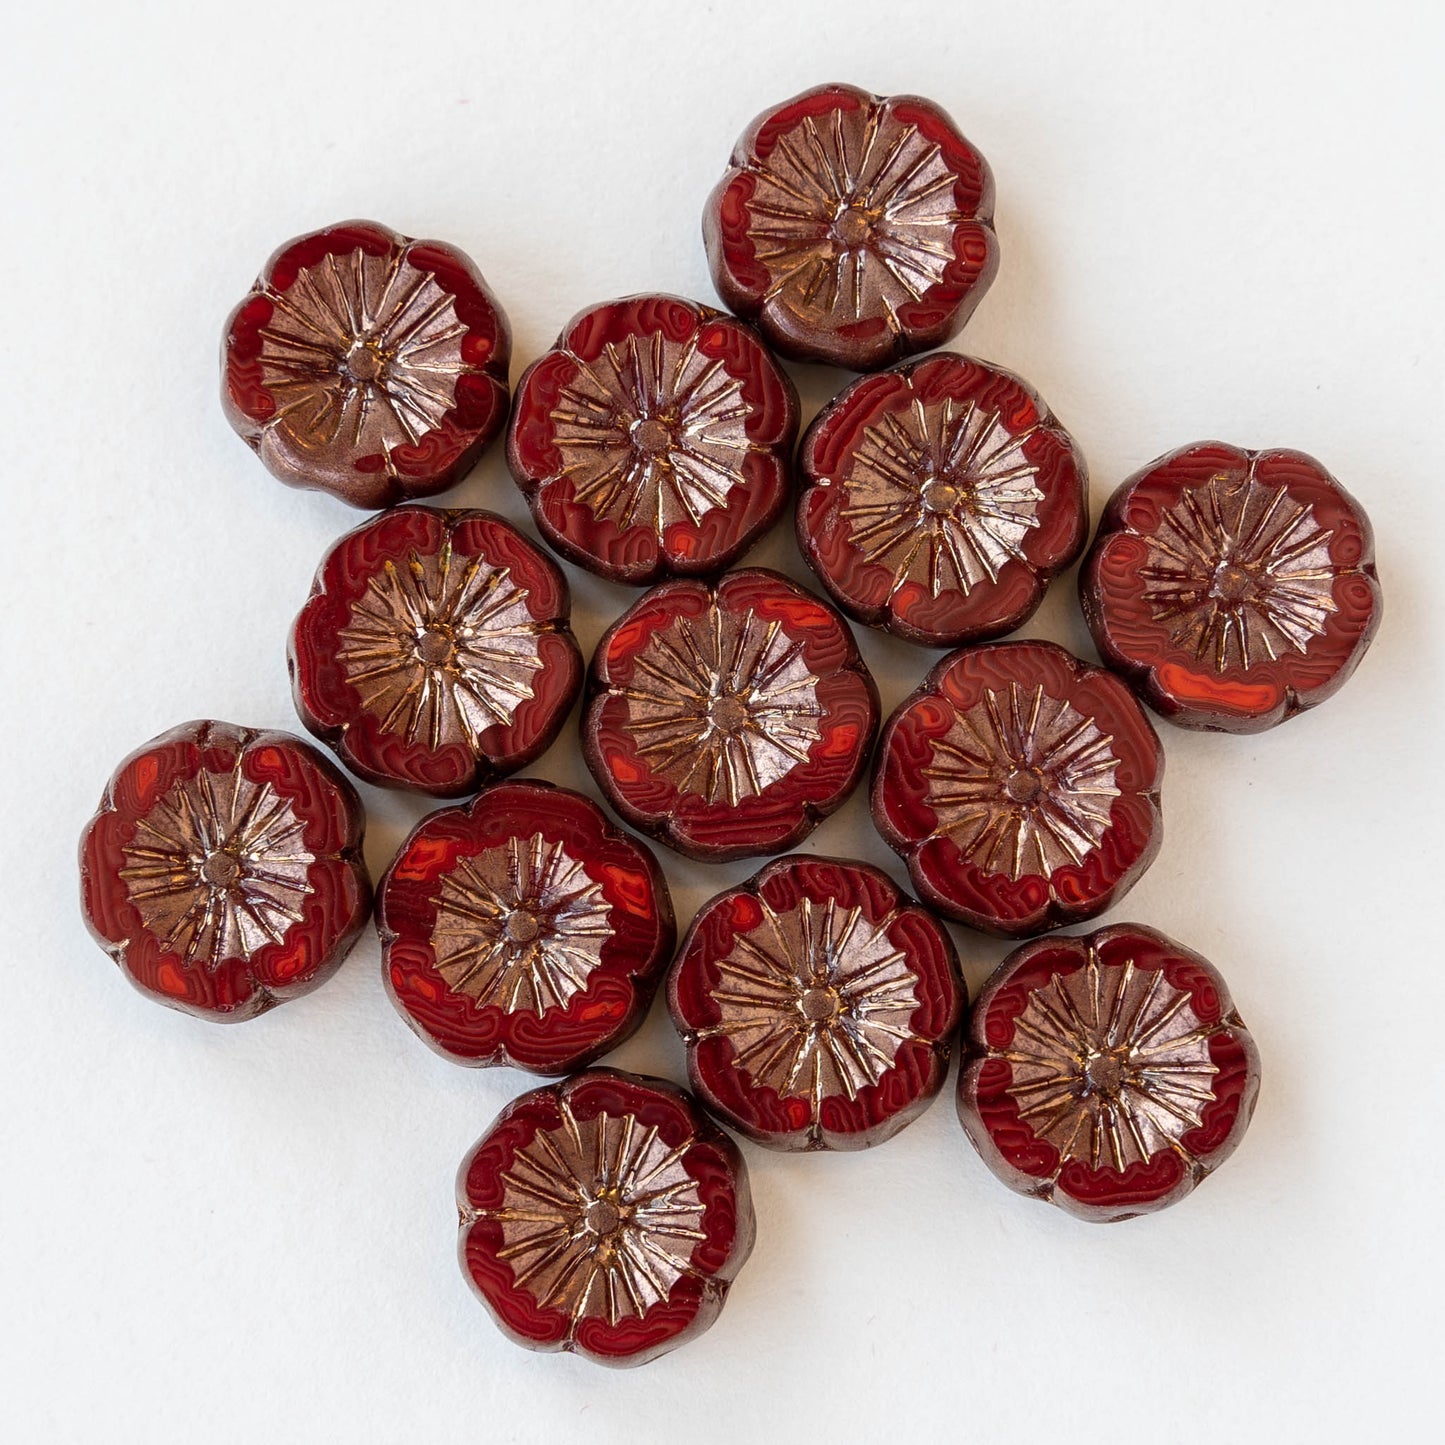 14mm Flower Beads - Ruby Red Mix with Bronze Finish - 10 Beads